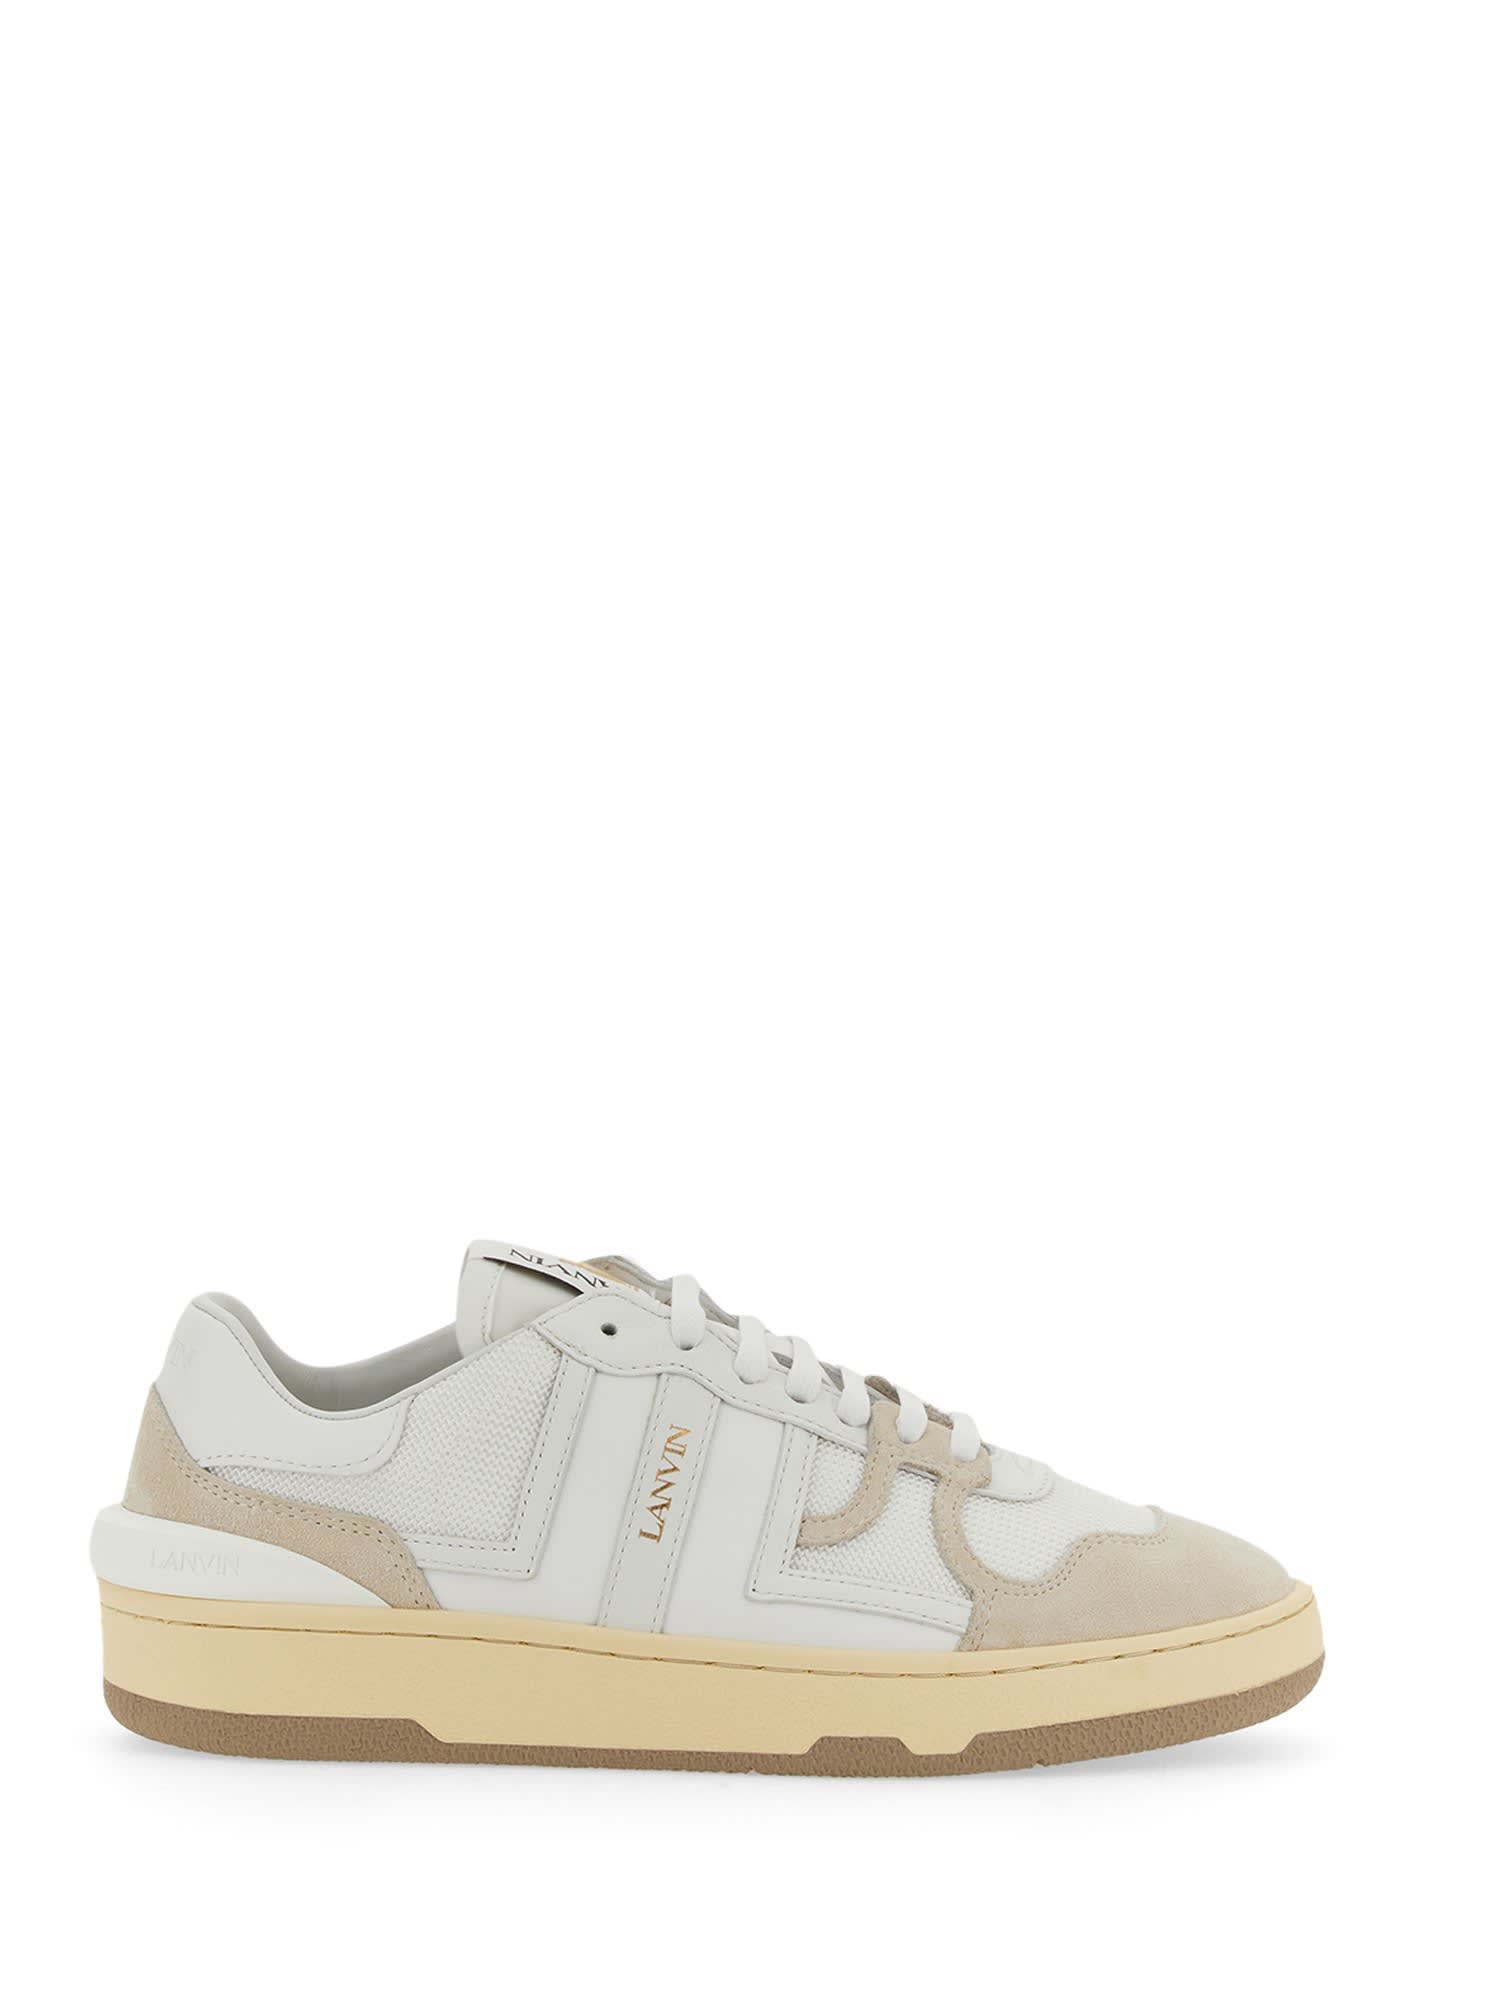 Lanvin Mesh, Suede And Nappa Leather Sneaker